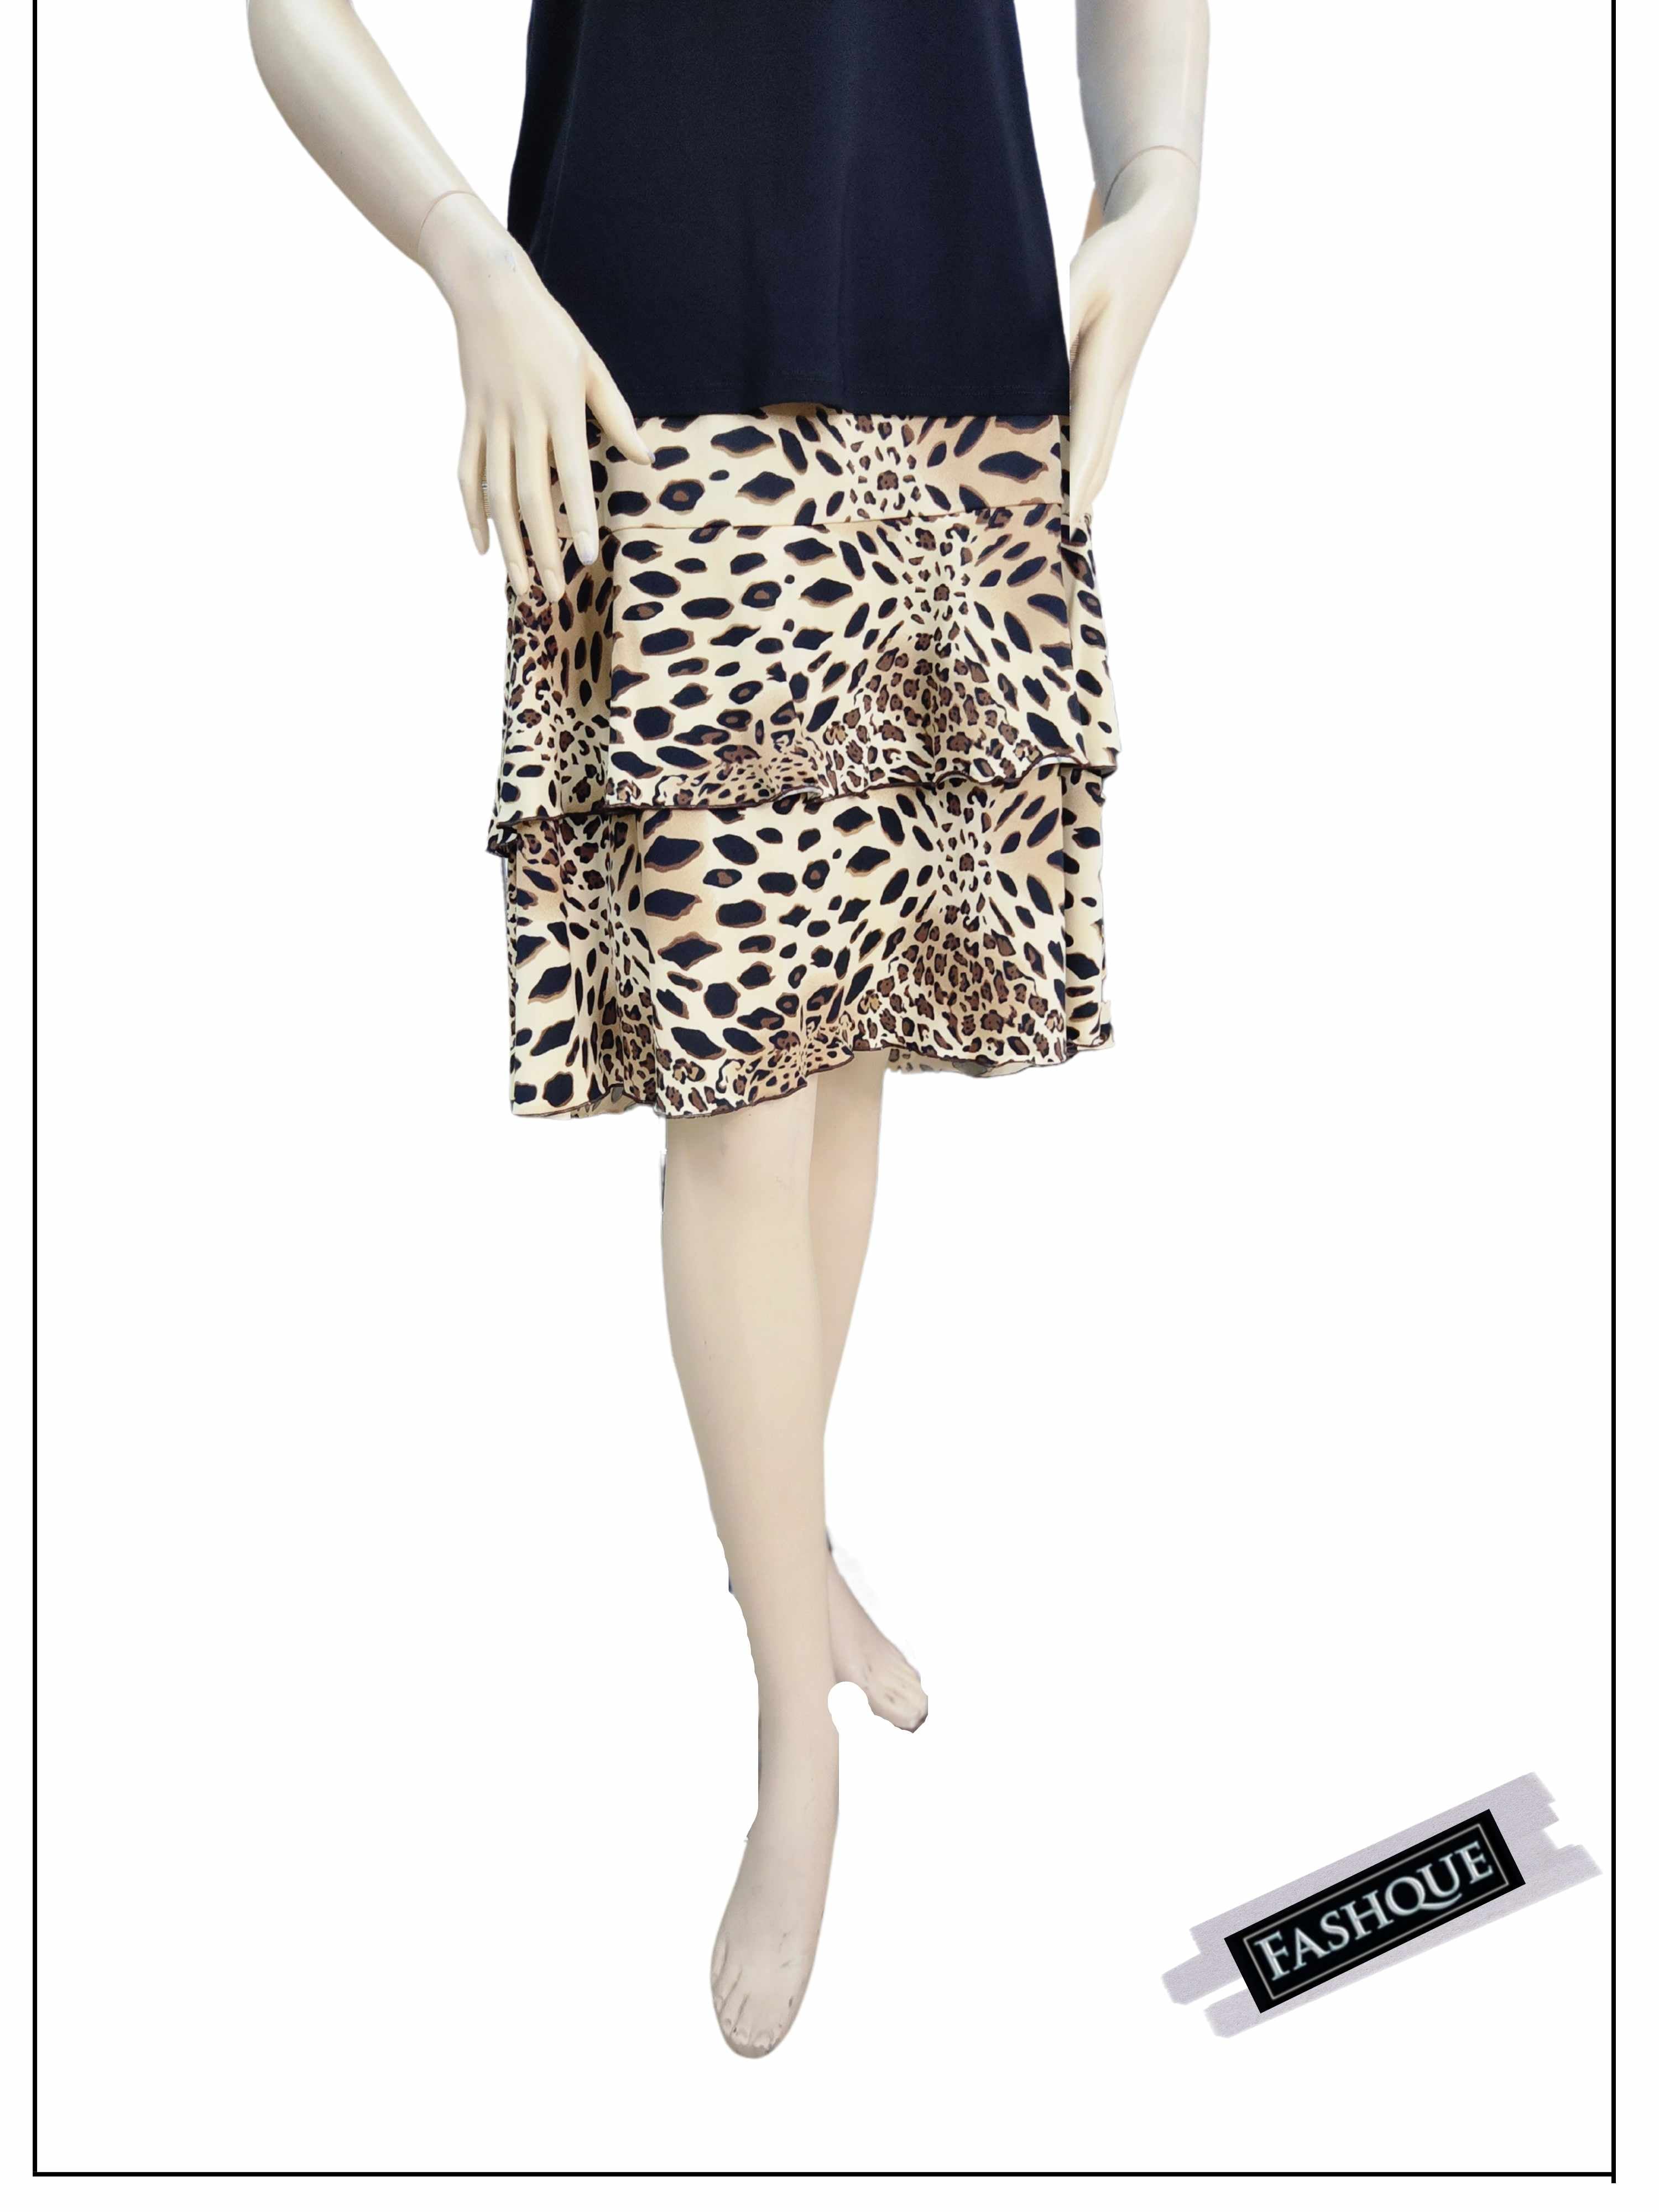 3 Tier PRINTED SKORT with the Ruffle in the center - SH001 SALE